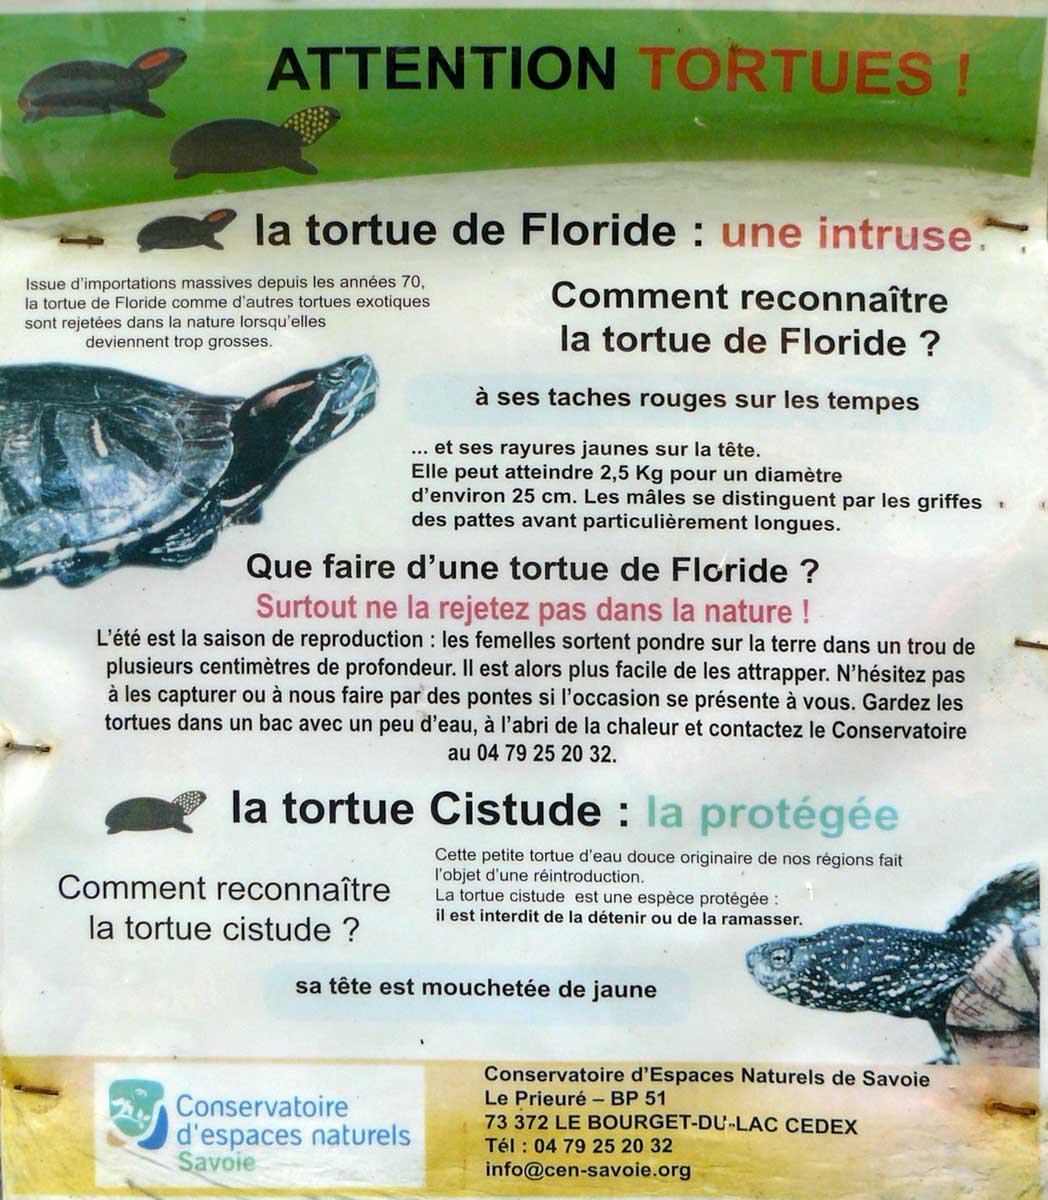 Attention : tortues !